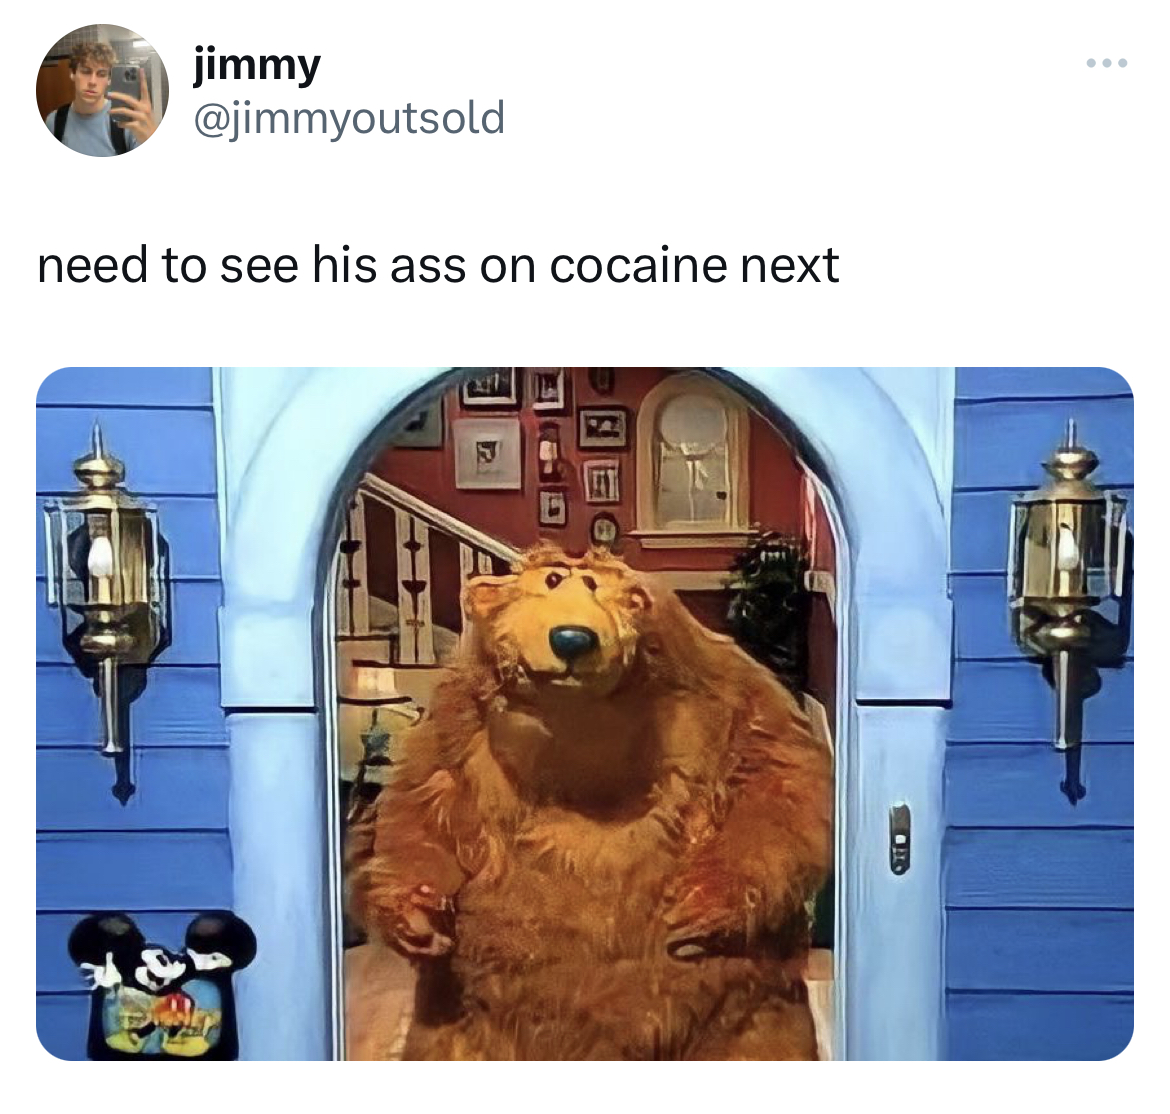 savage tweets - bear in the big blue house meme reddit - jimmy need to see his ass on cocaine next Ott